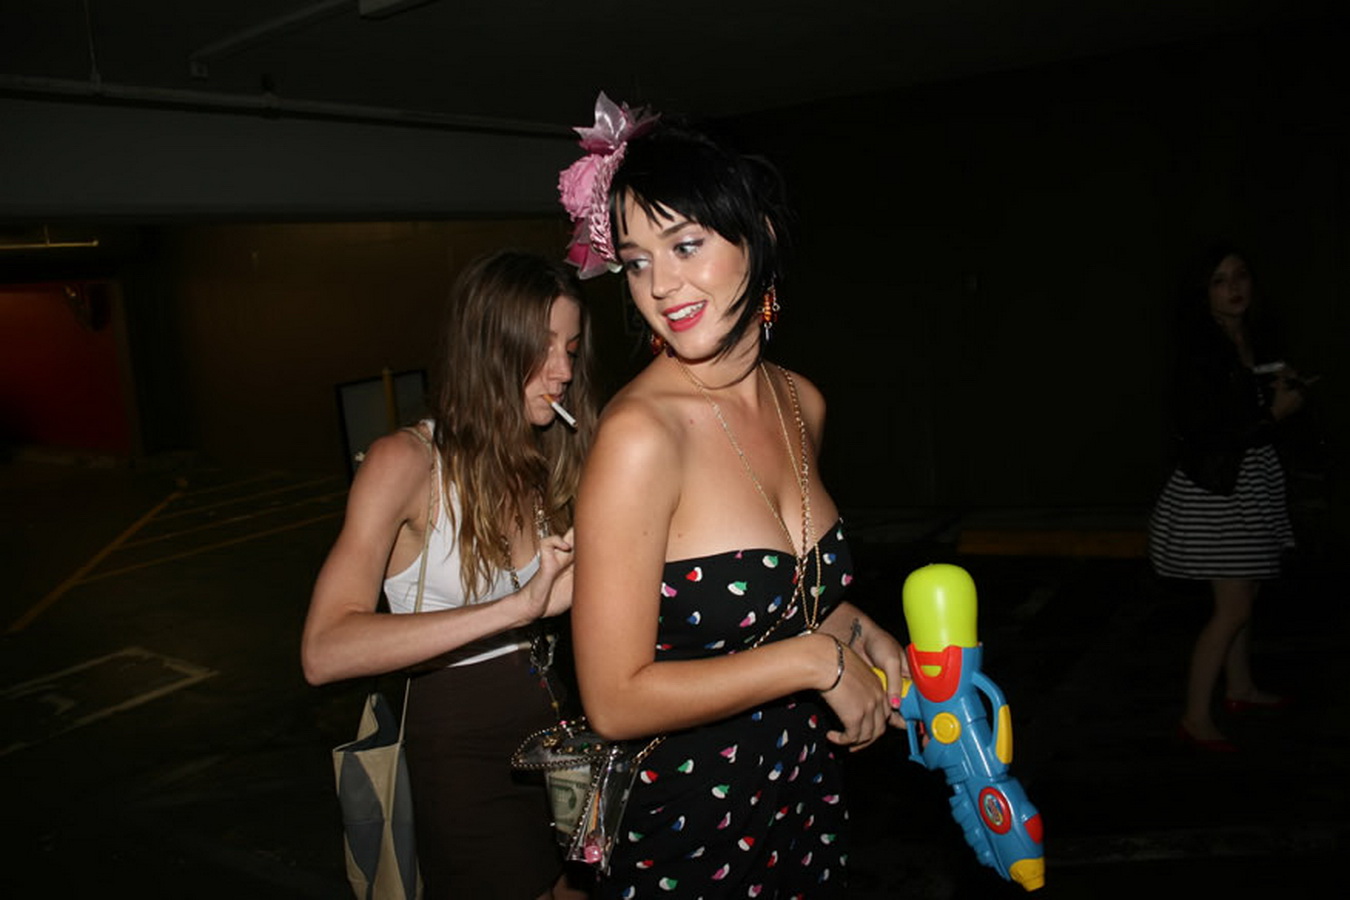 Katy_Perry_bobsslip_drunk_cleavage_downblouse_upskirt_nipslip_at_her_birthday_2007_party_99x_HQ_23.jpg